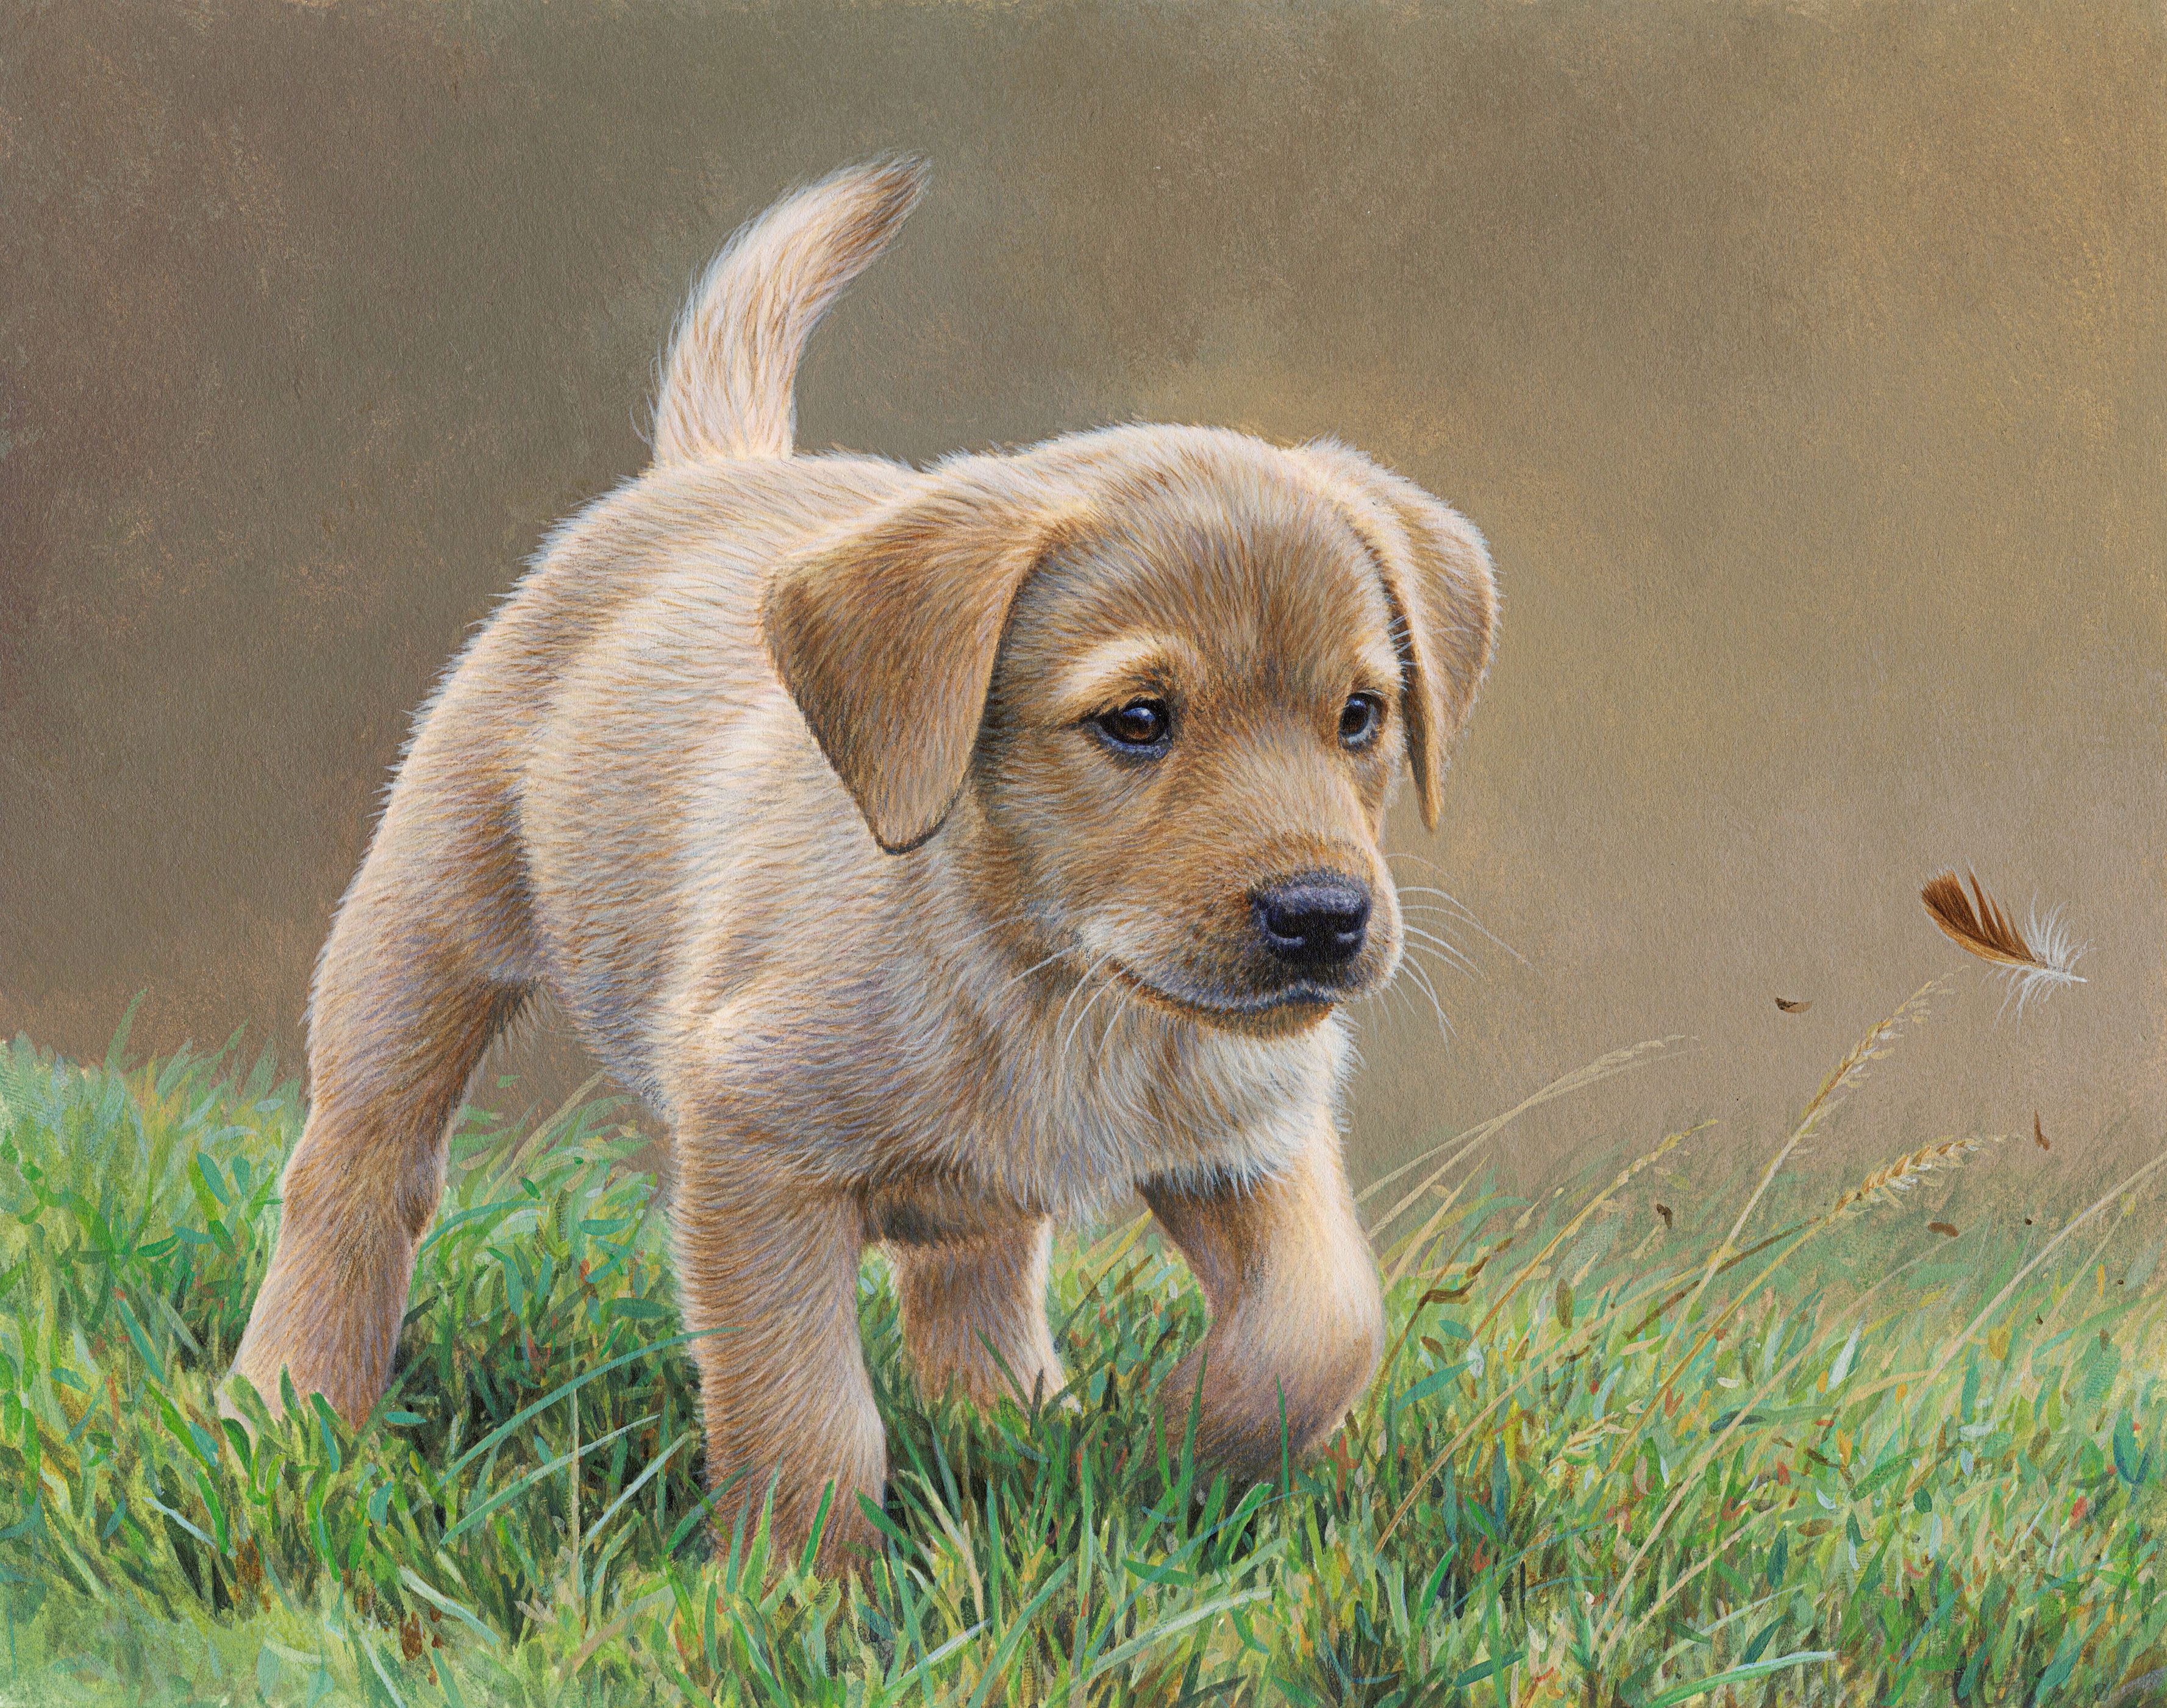 Yellow labrador puppy chasing feather in grass